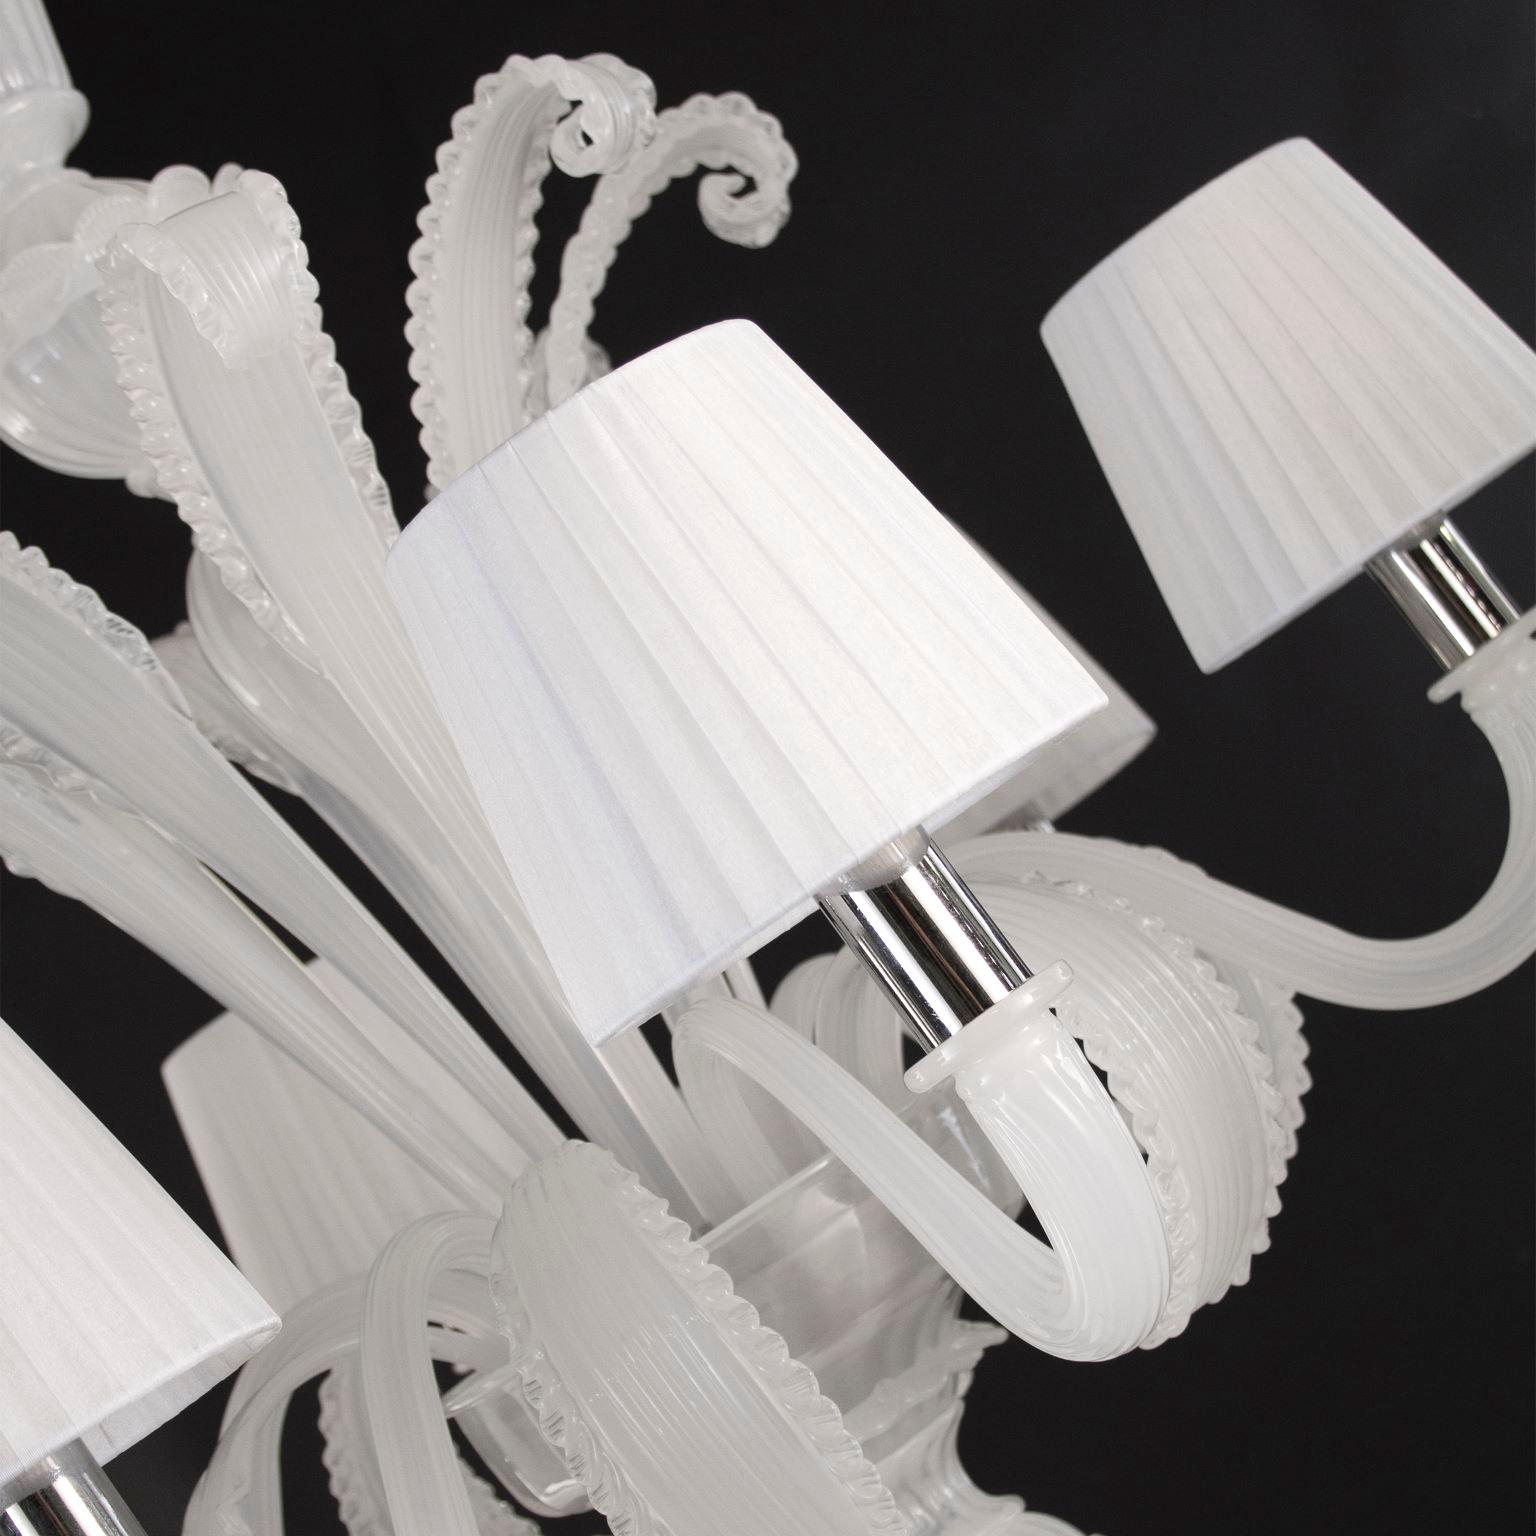 Venetian chandelier with 6 arms in white silk Murano glass with white cotton lampshades.
This is a classic Murano glass chandelier, as it is in the collective imagination. As many other chandeliers in our collections, this is designed with attention